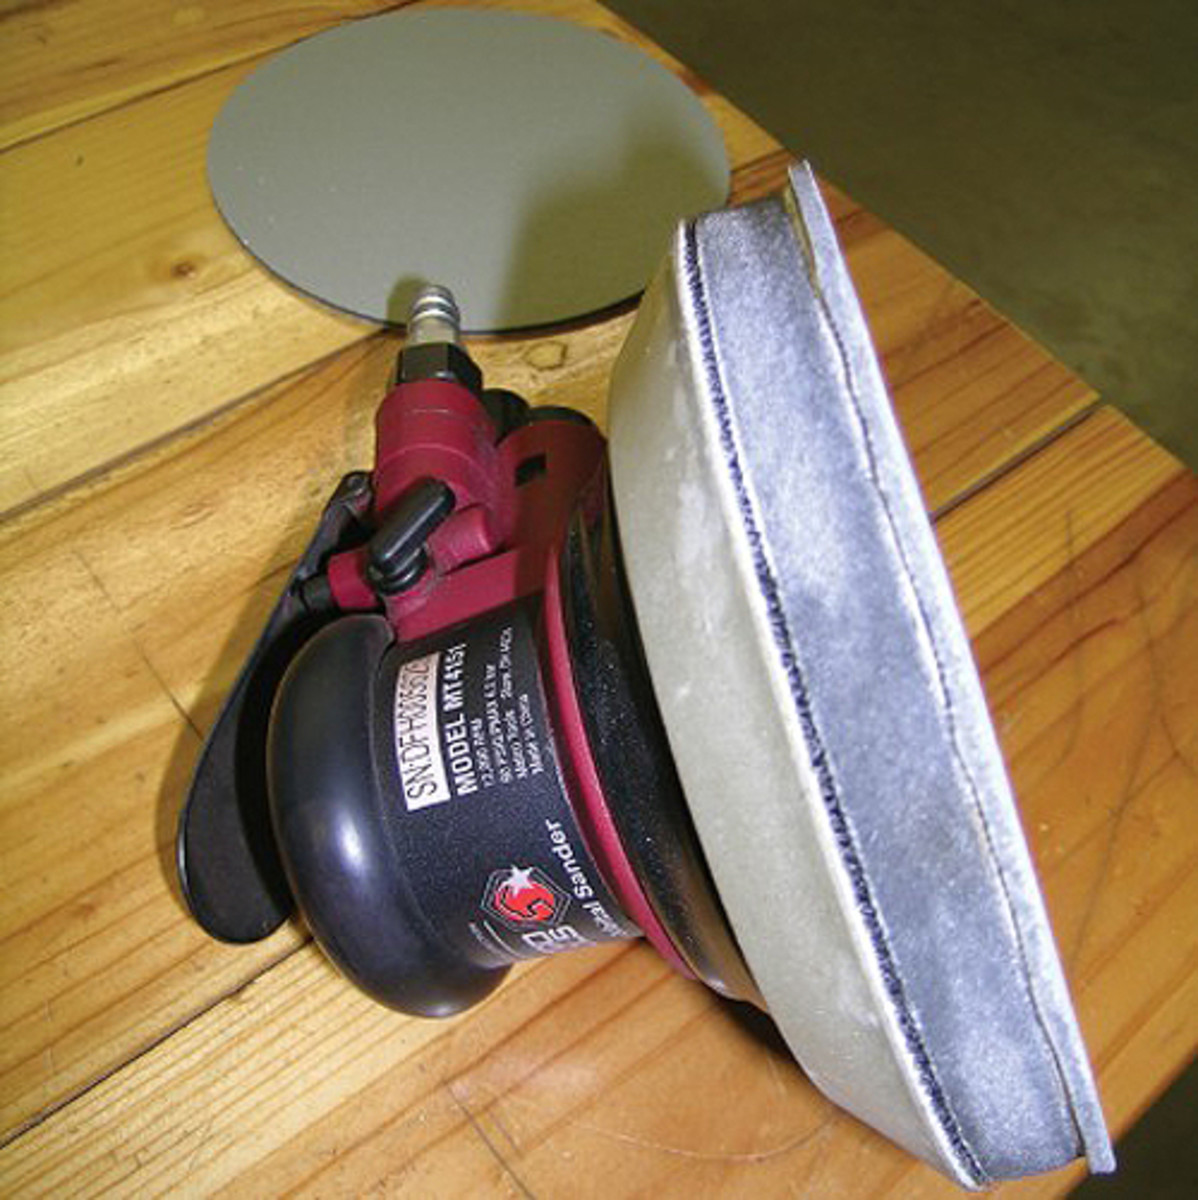  Once he works through 800-, 1,000-, 1,200-, 1,500- and 2,000-grit sandpaper using sanding blocks, Kopecky switches to a random orbital sander for sanding with a 3,000-grit disk. He installs a thick pad beneath the 3M Trizact 3,000-grit sanding disk so the pad flexes without digging into the paint while he sands with medium pressure at a low to medium speed.